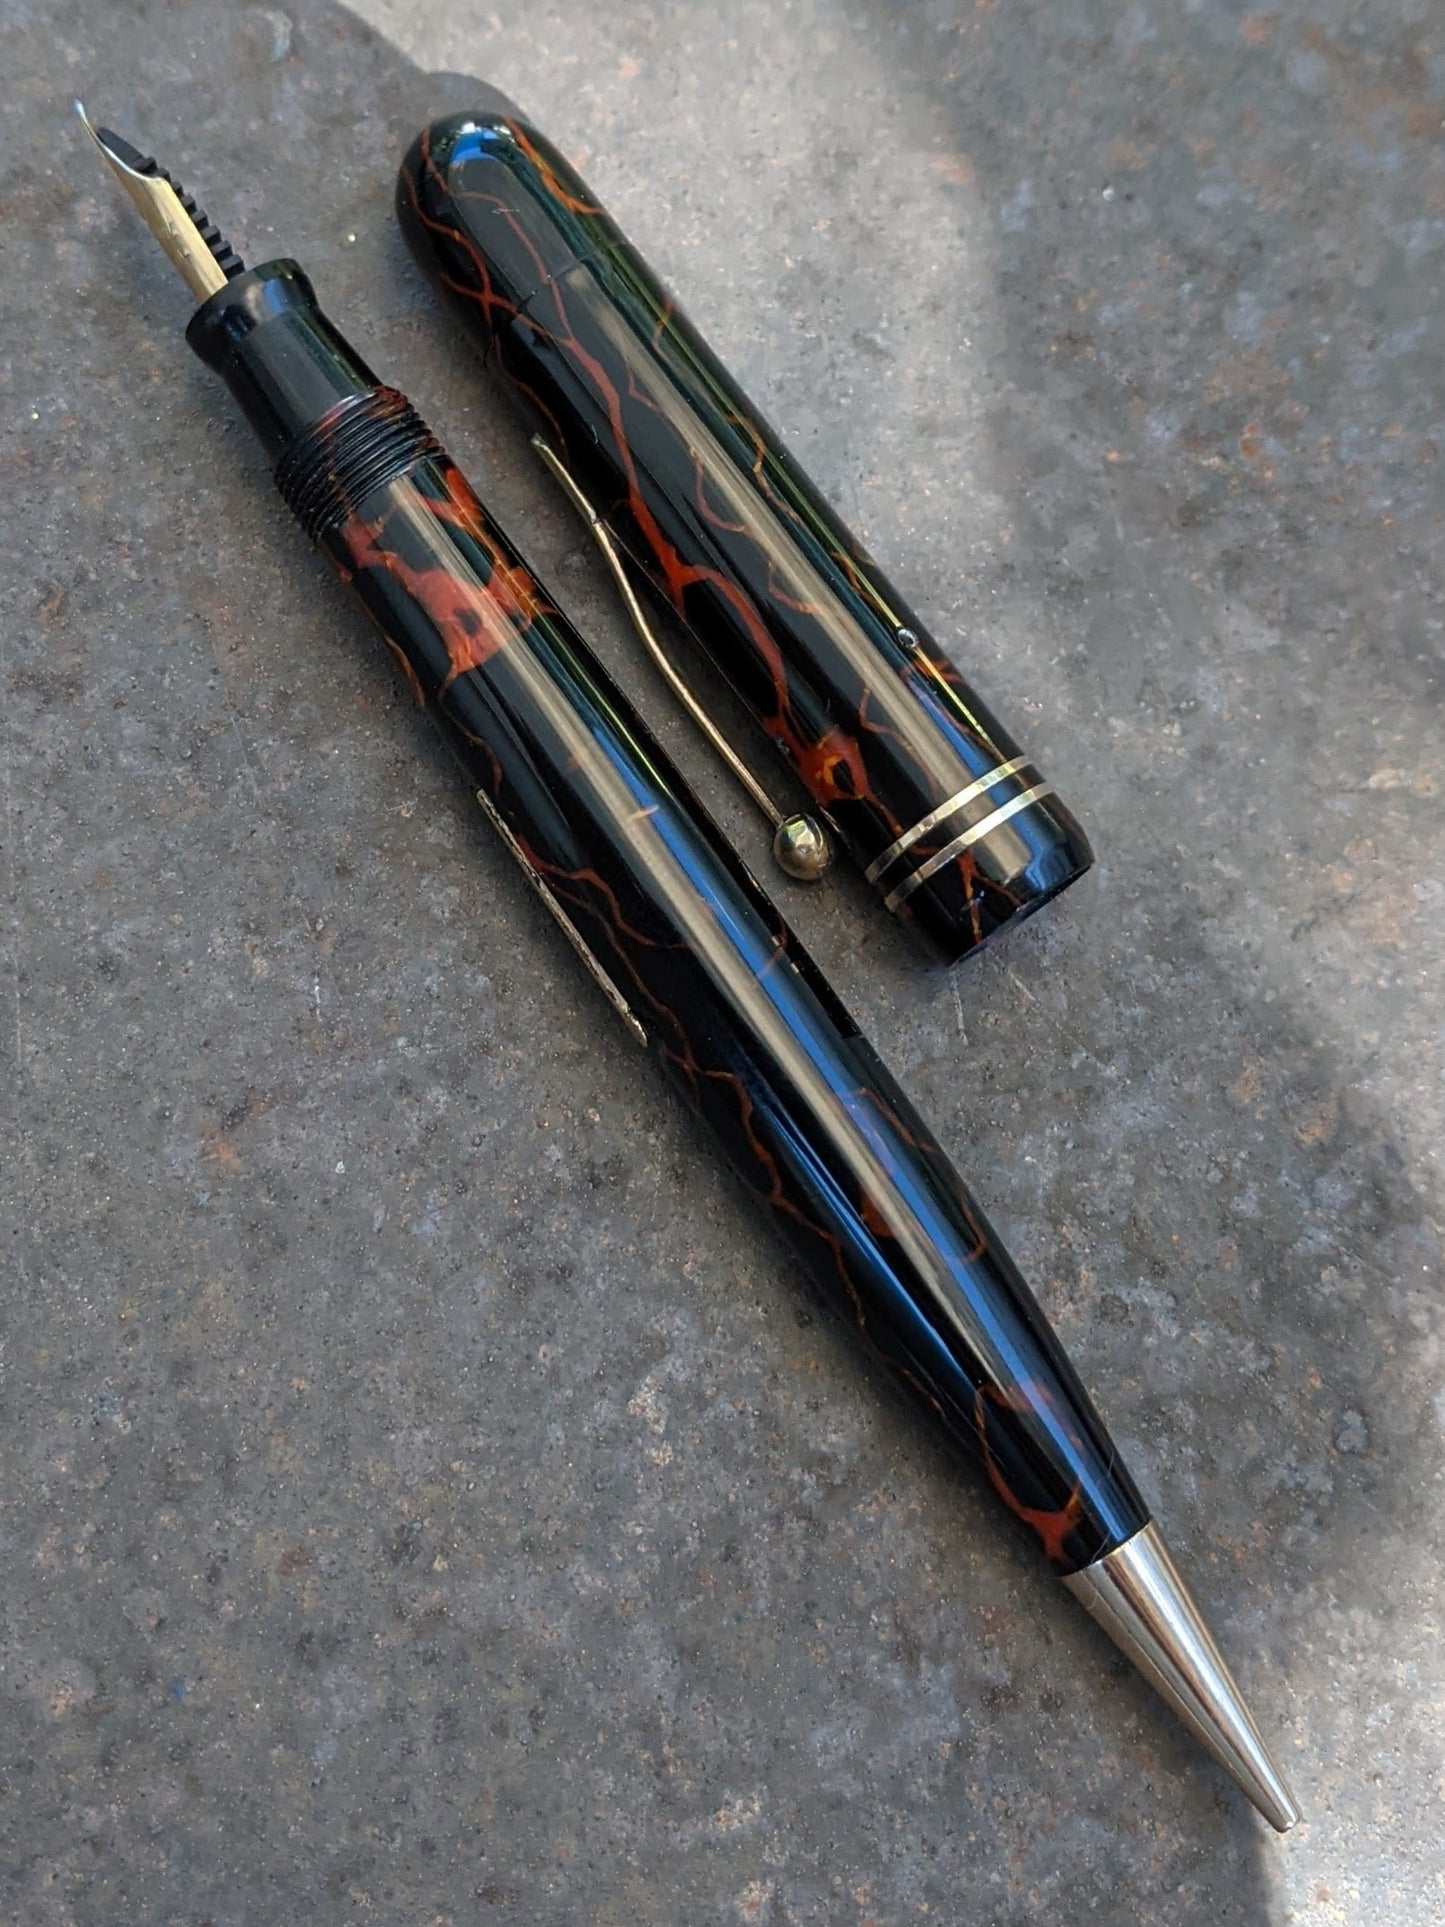 Black 'n' Red Mabie Todd Swallow Combo pen/pencil